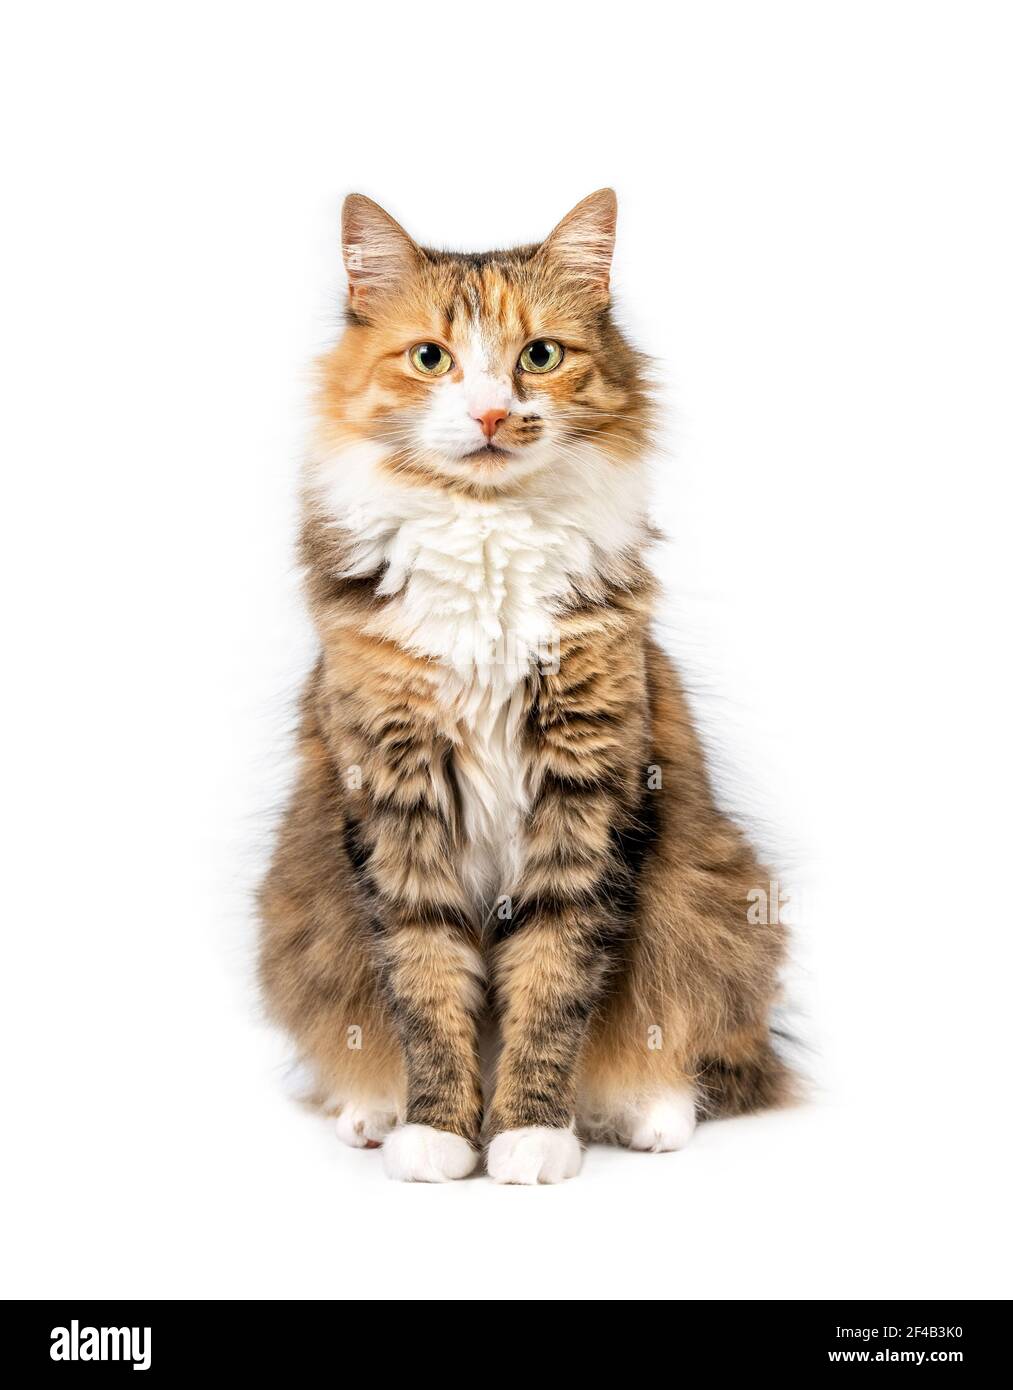 Fluffy cat sitting down. Full body cat portrait. Cute orange, white and black torbie kitty is looking at the camera. Yellow eyes and beautiful asymmet Stock Photo